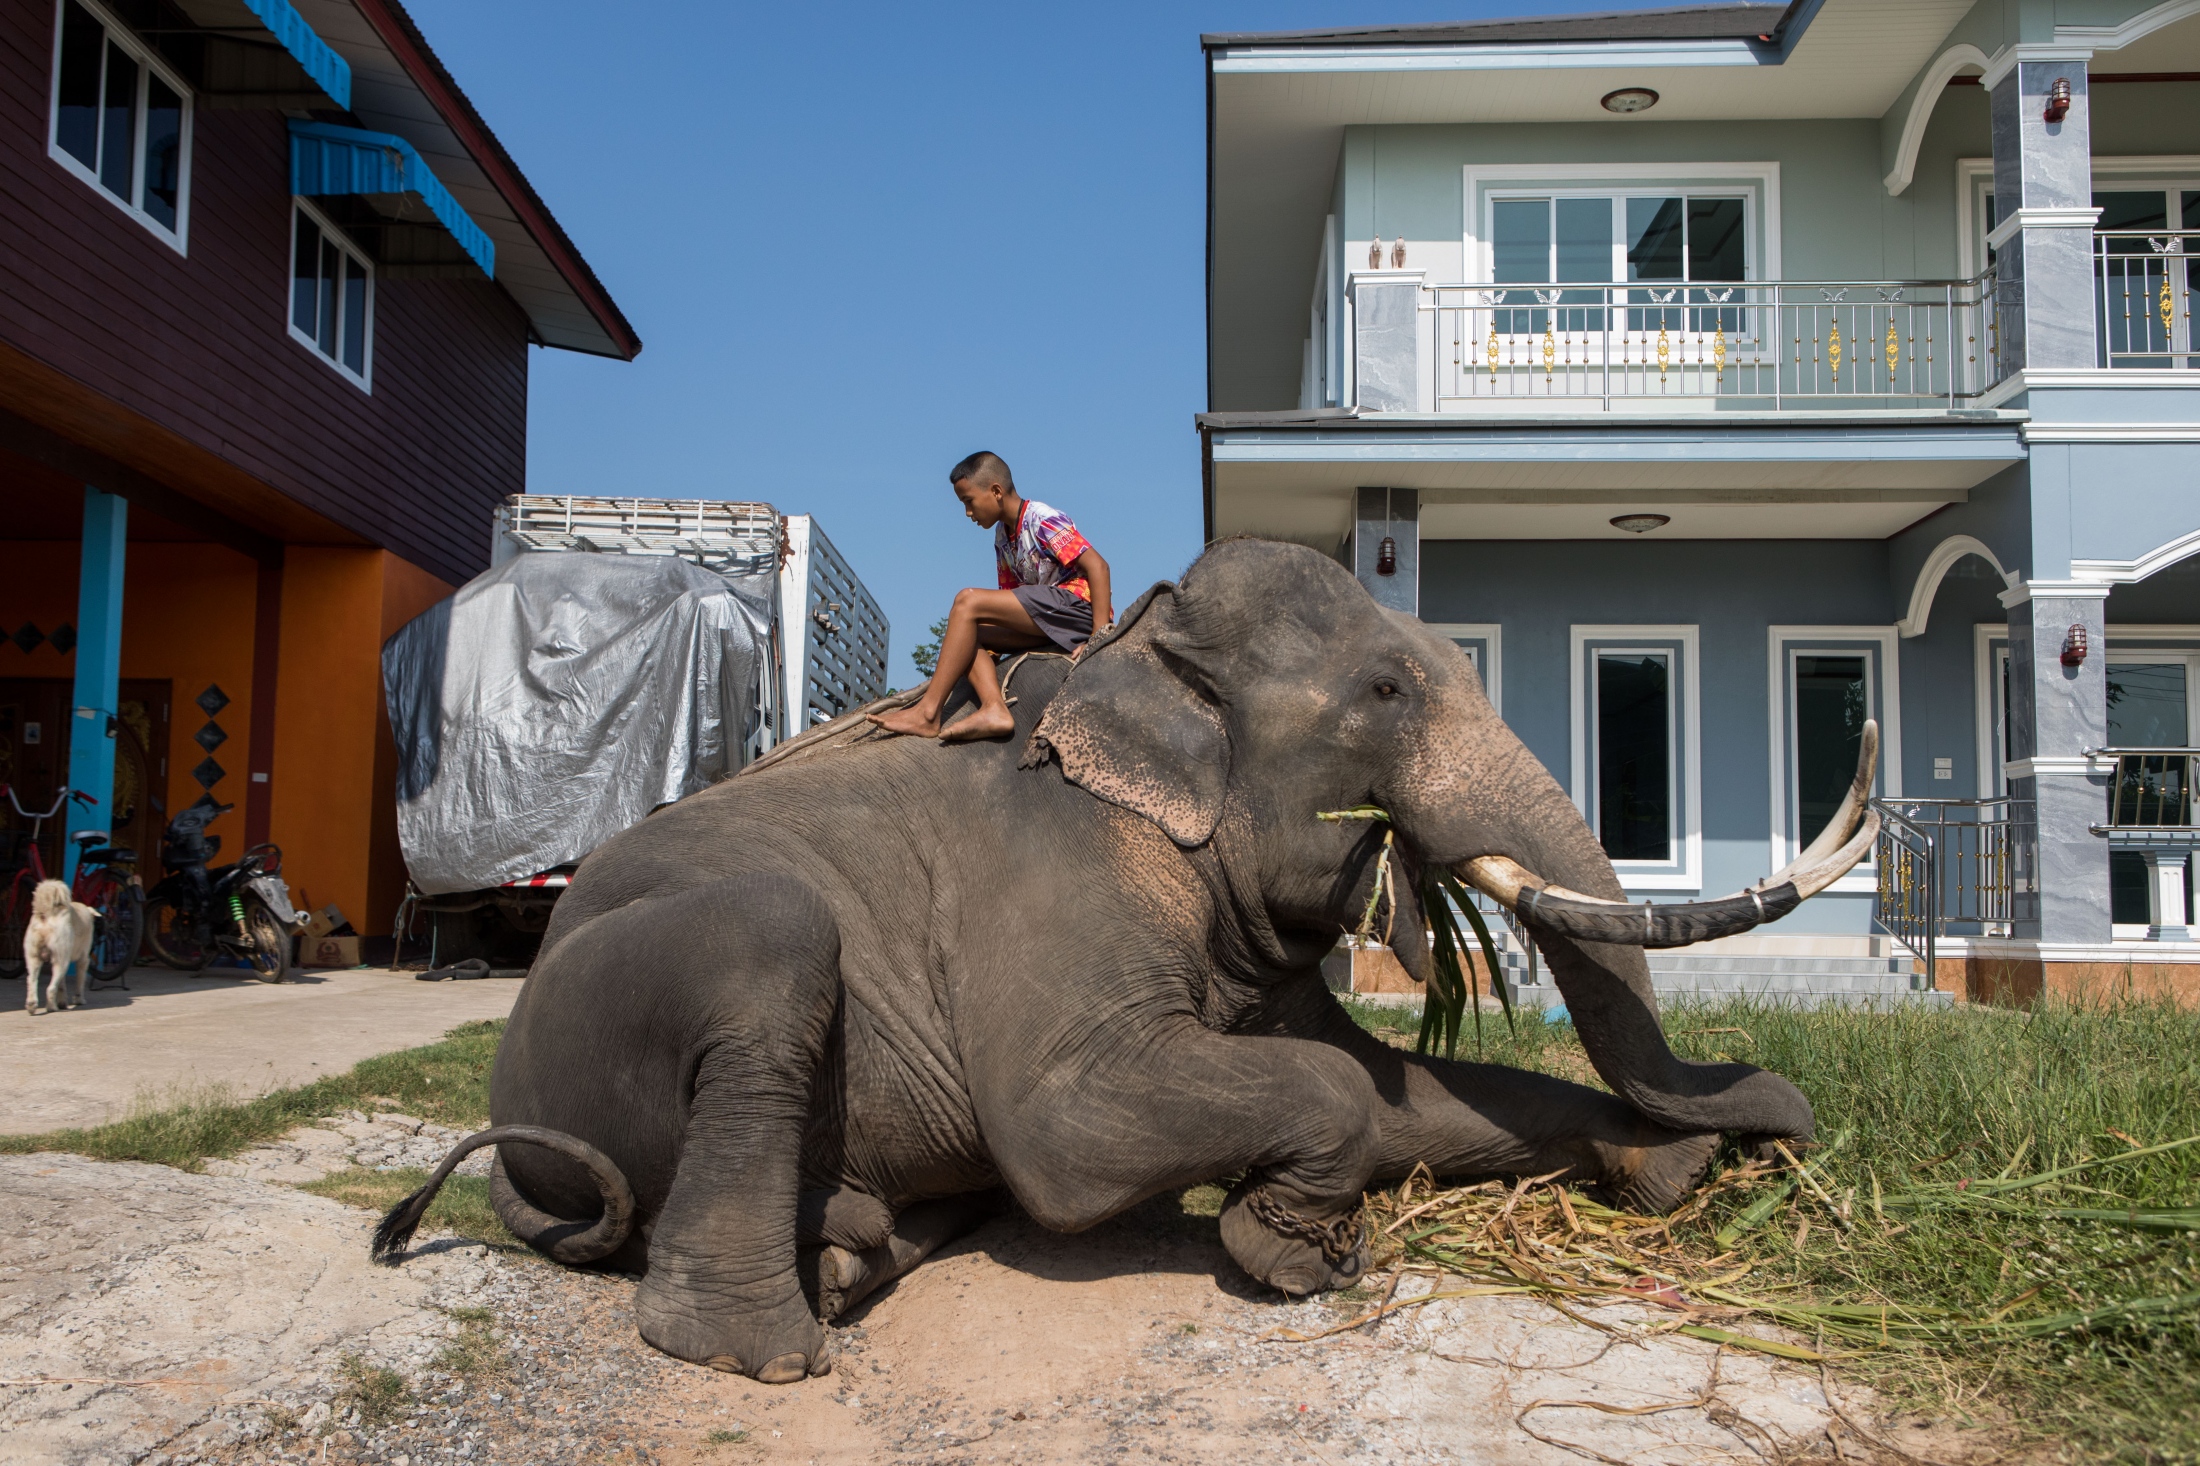 Recent - New Problems for Thailand's Elephants Amidst Global Pandemic [National Geographic]